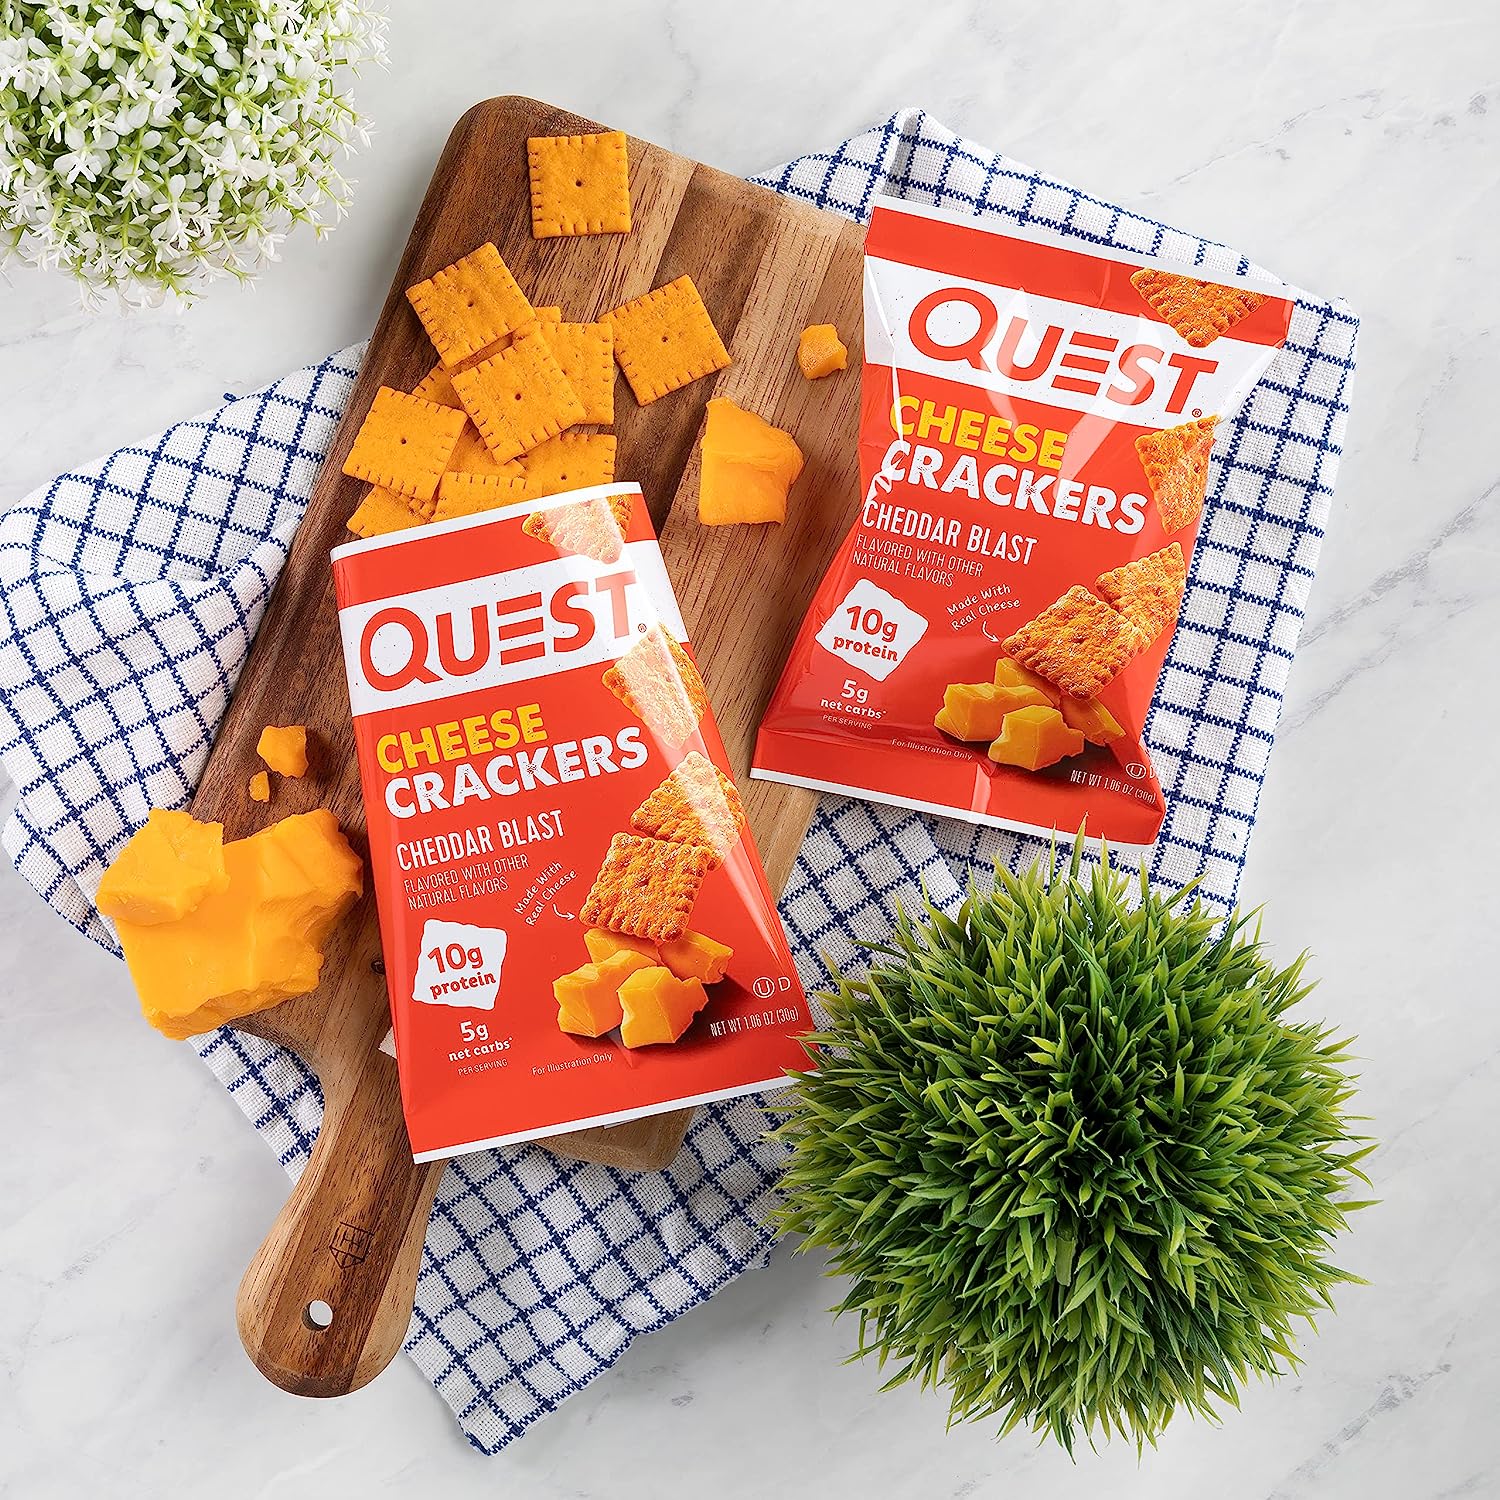 Quest Nutrition Cheese Crackers (1 bag) quest-nutrition-cheese-crackers-1-bag Protein Snacks Cheddar Blast,Spicy Cheddar Quest Nutrition